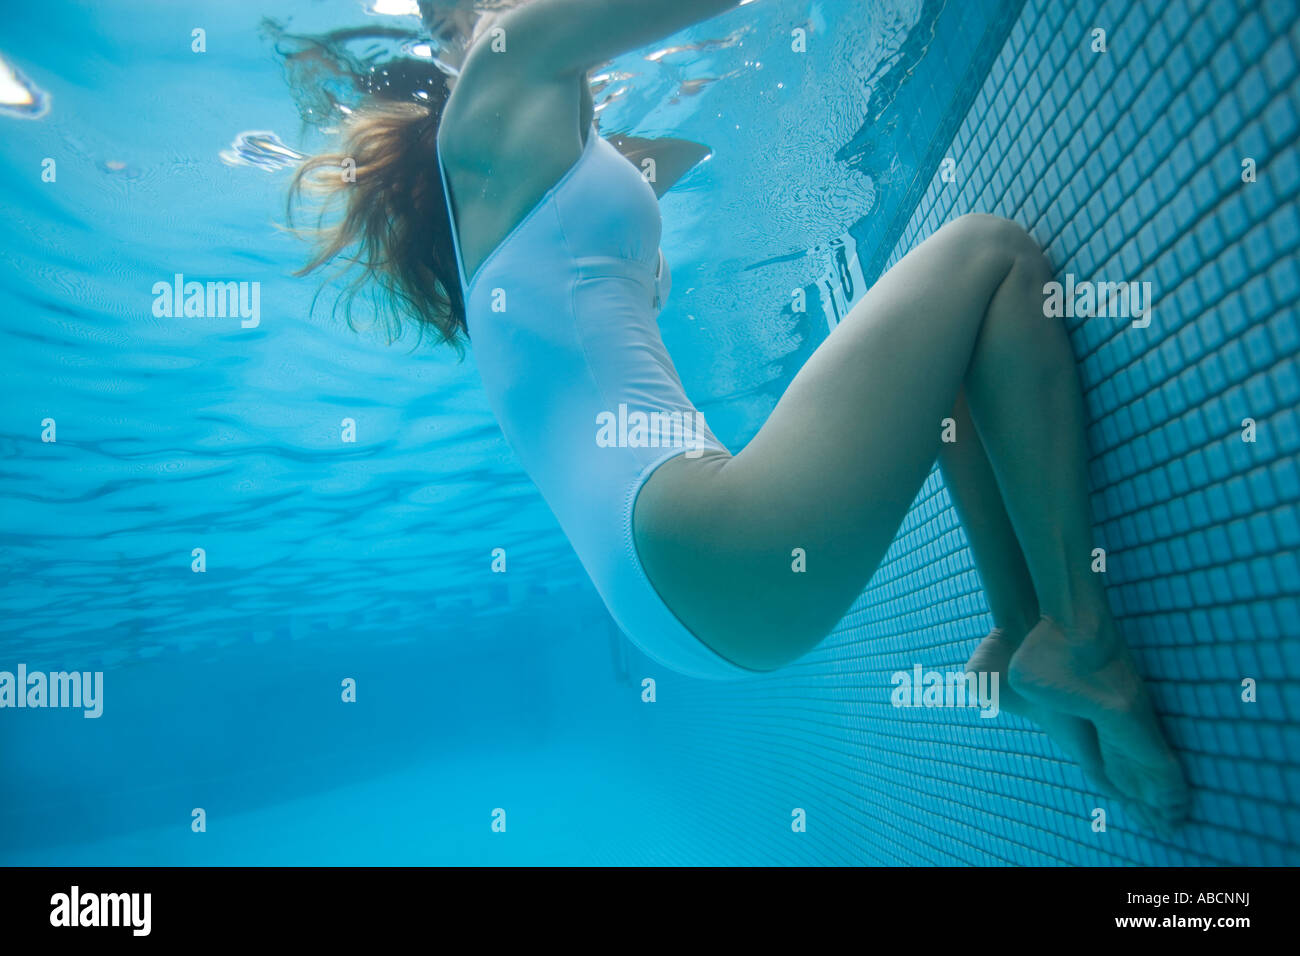 Underwater view of adult female resting at edge of swimming pool Stock Photo